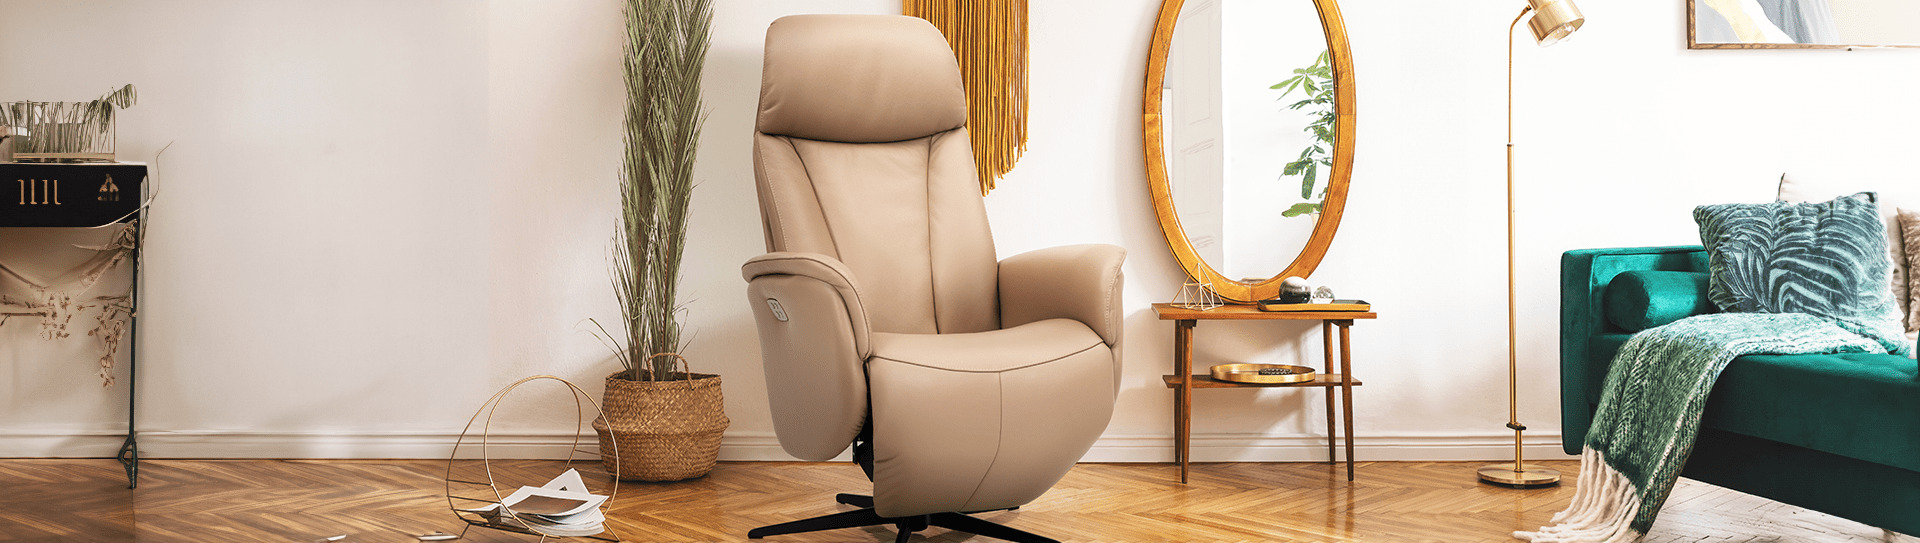 Fauteuil relaxation THEO 7615 Géant du Meuble-Fauteuil-relaxation-THEO-7615-BAN